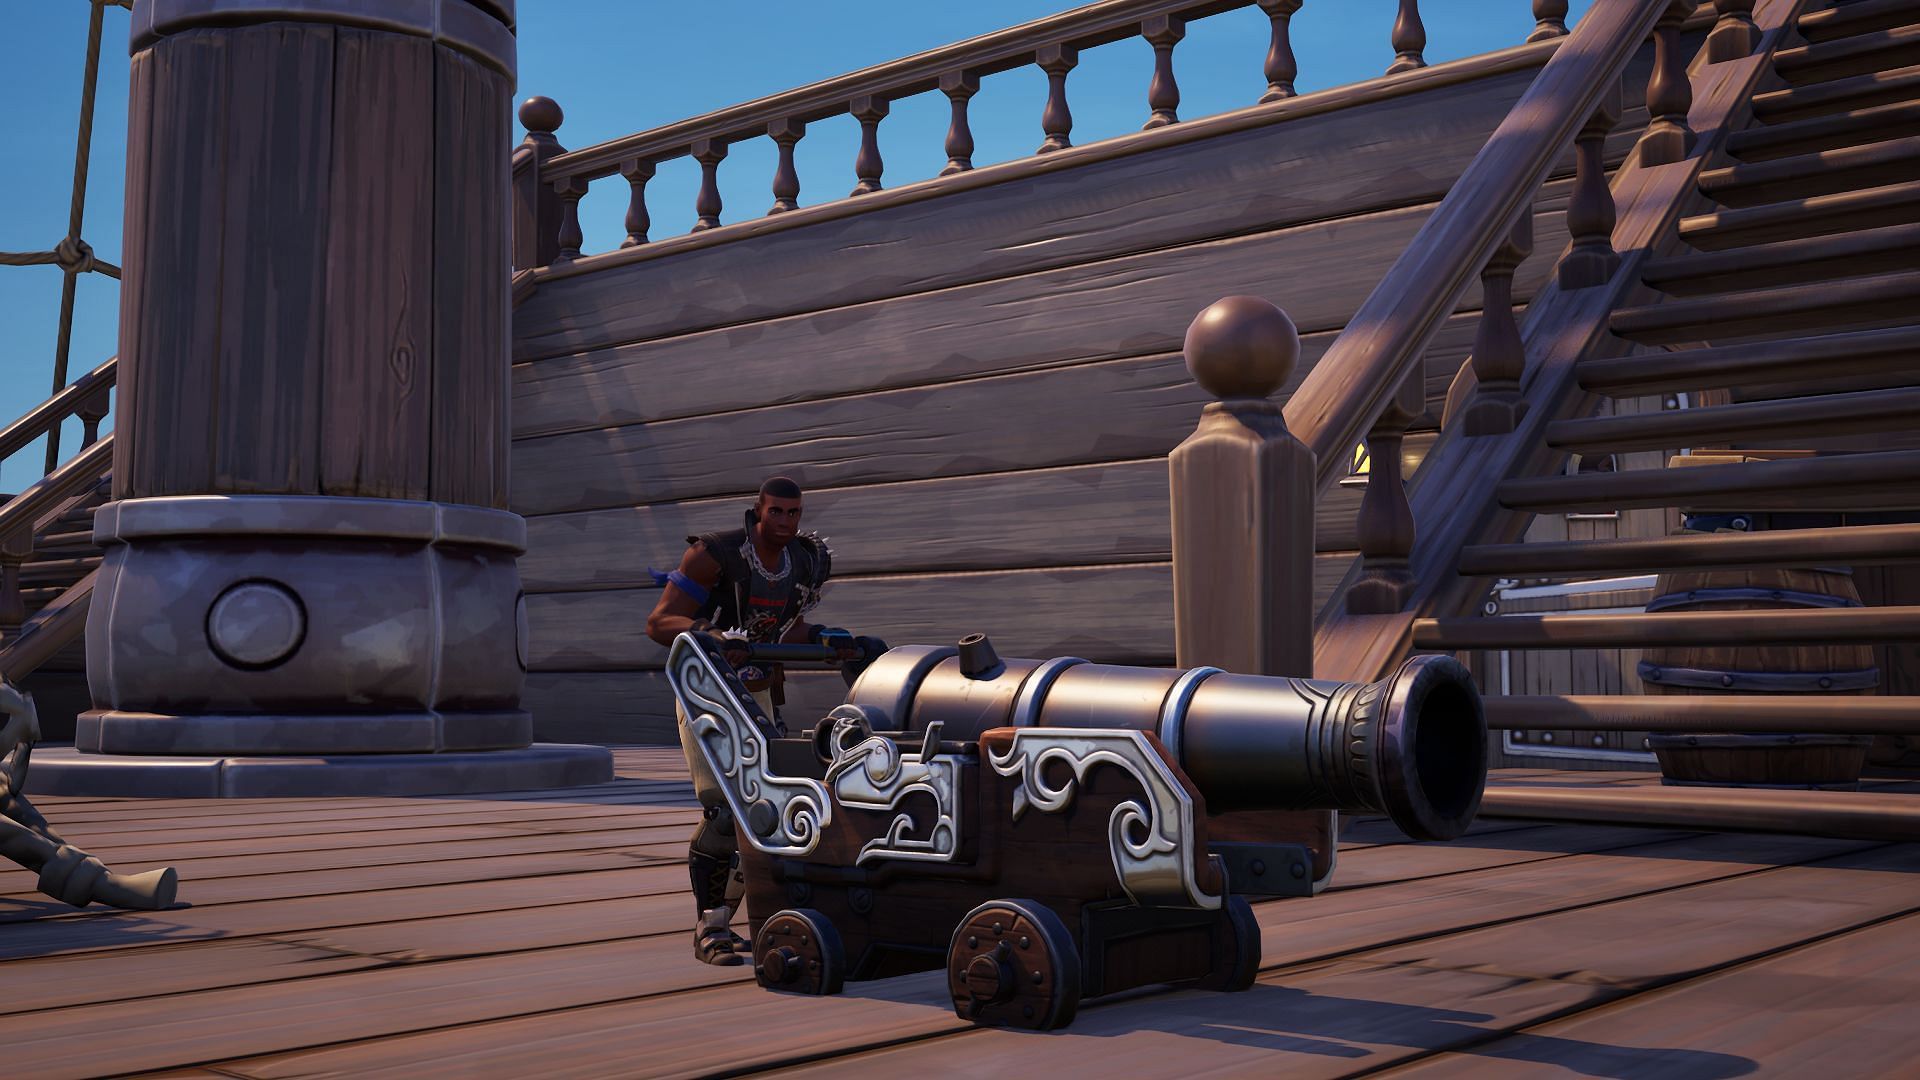 Fortnite Pirates of the Caribbean collaboration leaks showcase upcoming items